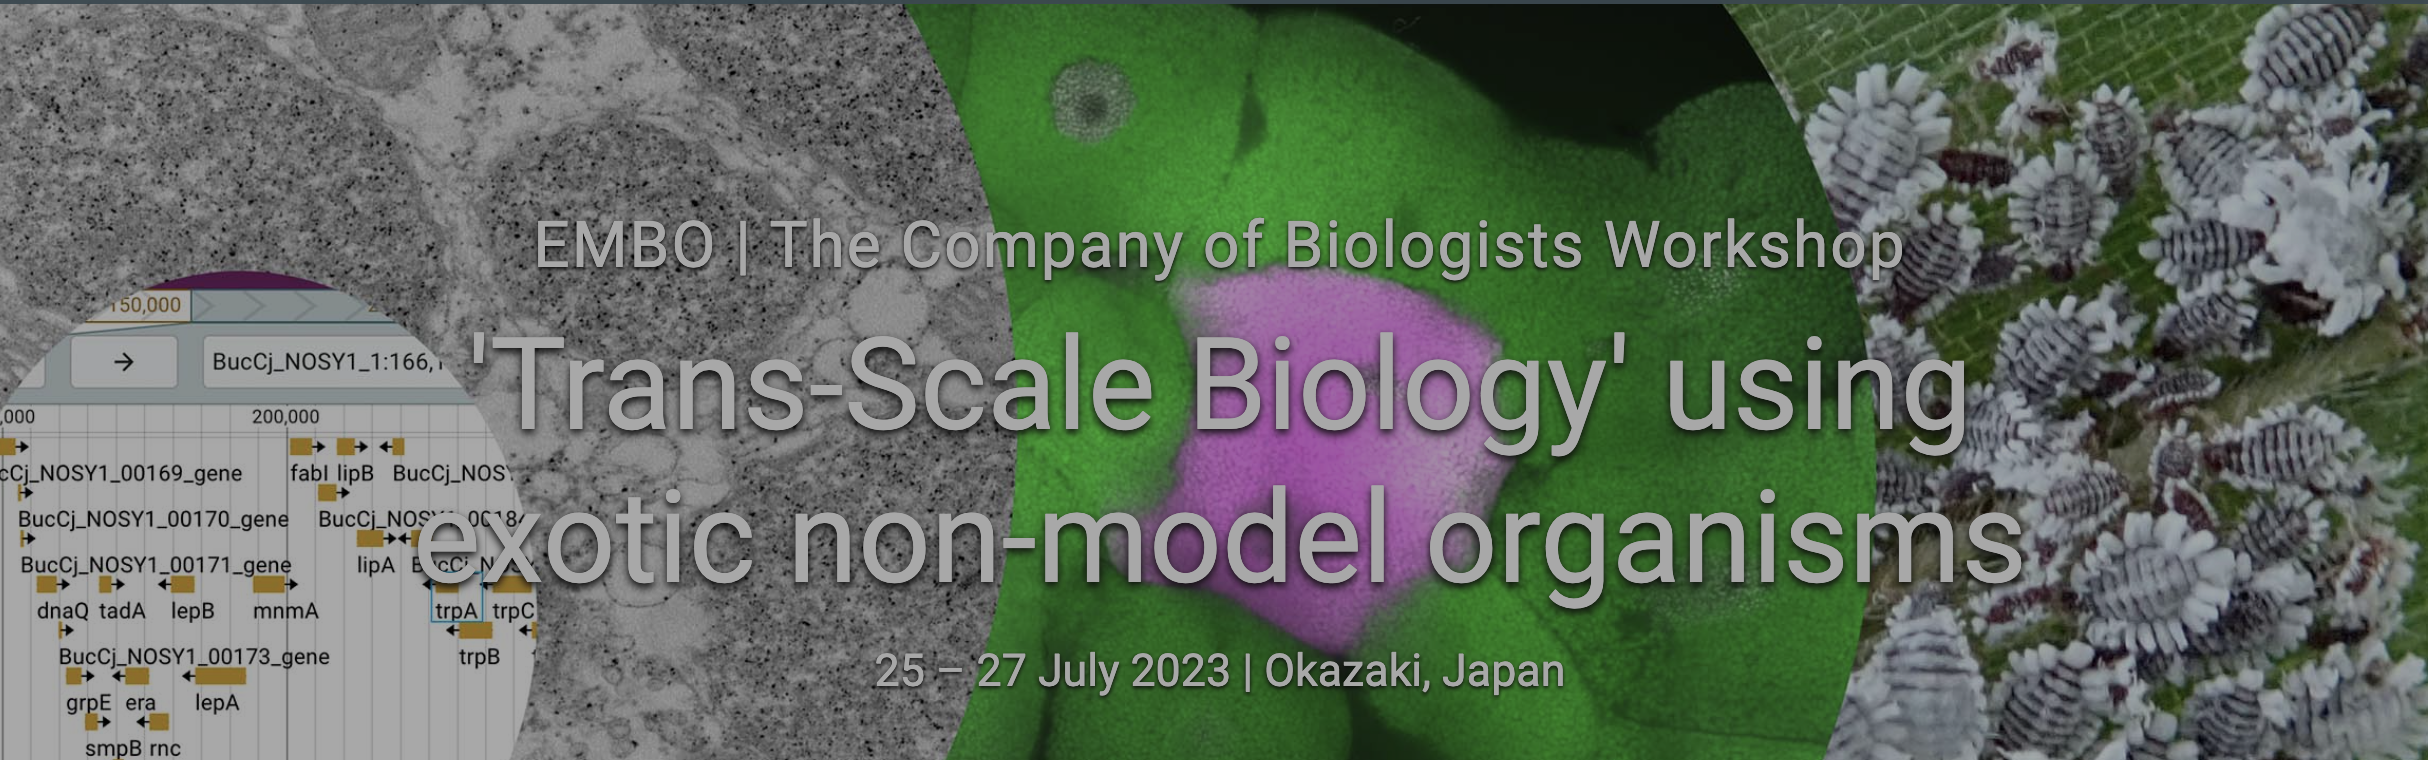 Call for participants for the EMBO | COB Workshop “Trans-Scale Biology using exotic non-model organisms”